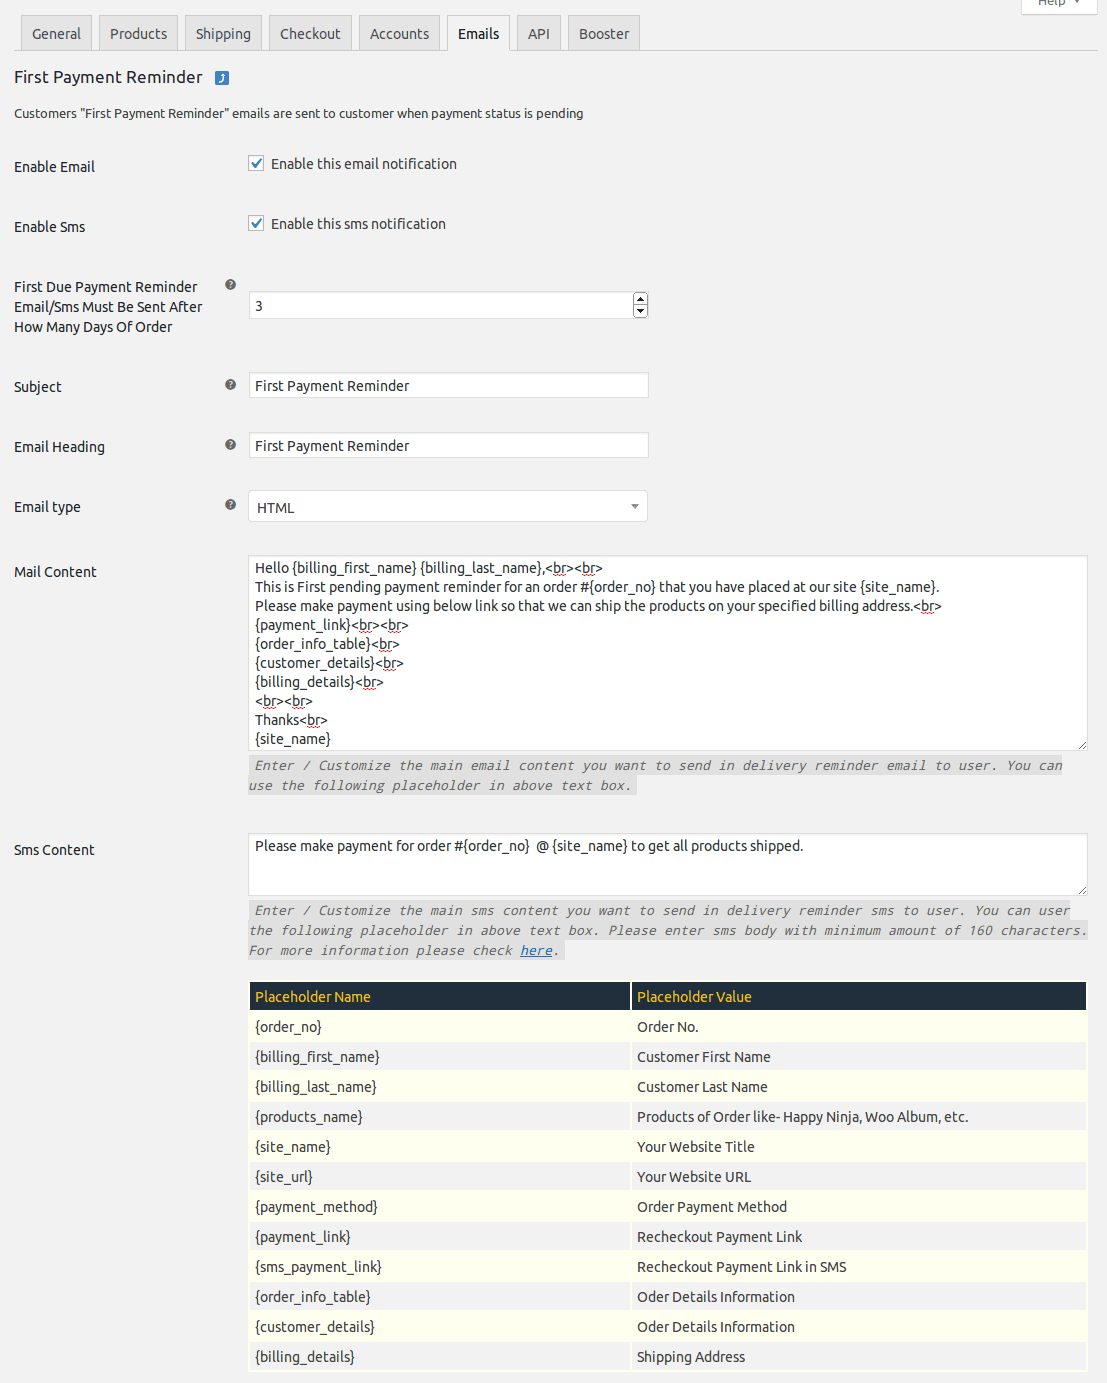 First Pending Payment Reminder Mangeable settings